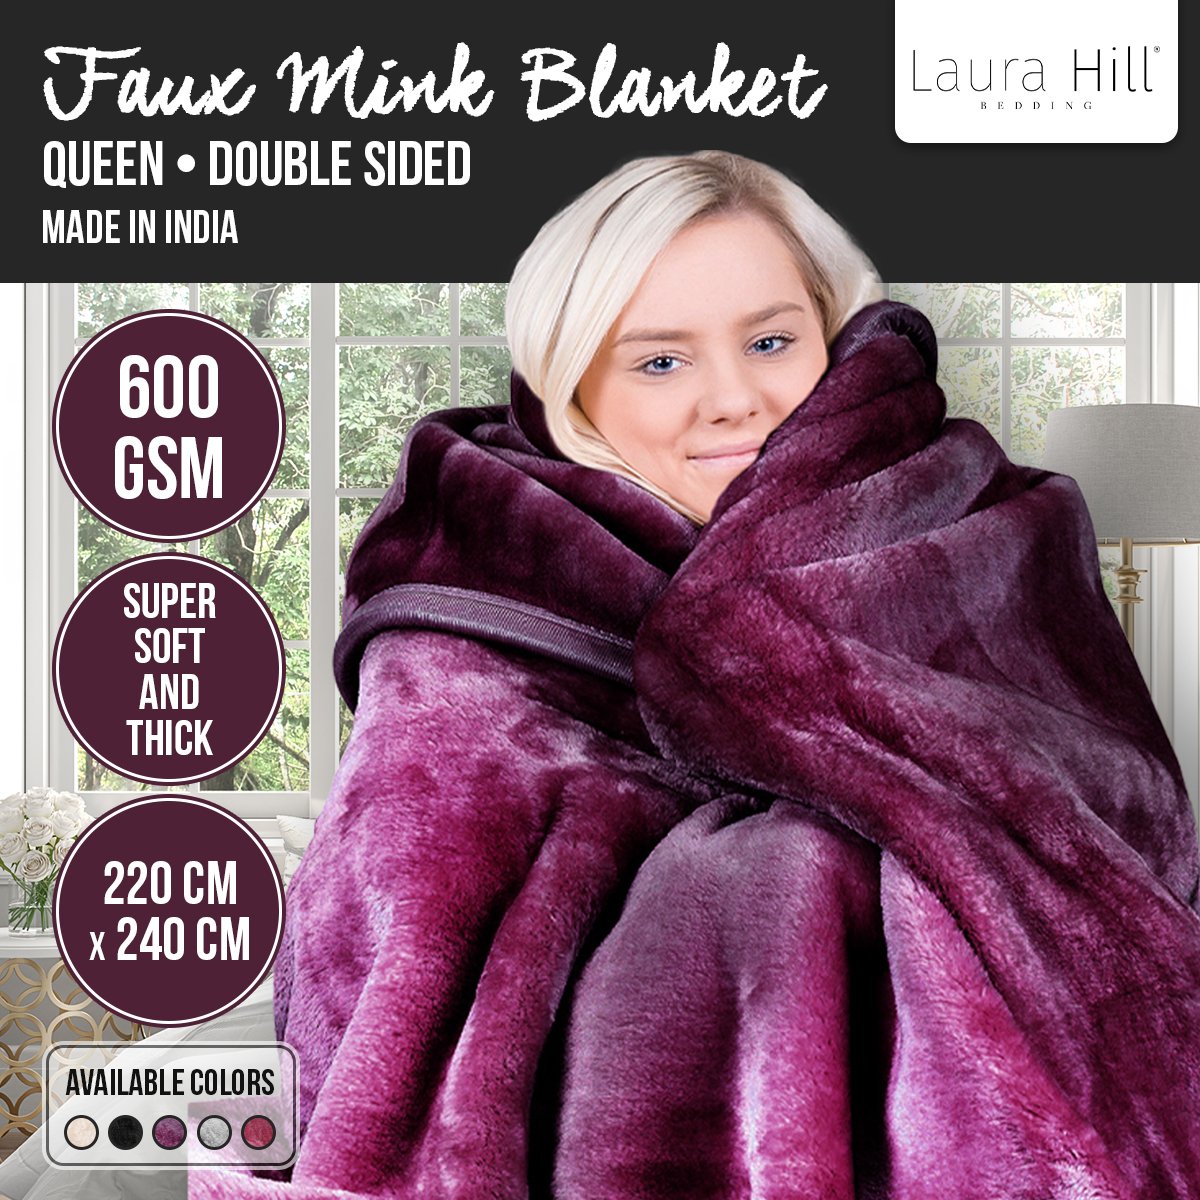 Laura Hill Mink Blanket Throw Purple Double Sided Queen Size Soft Plush Bed Faux Rug - BM House & Garden